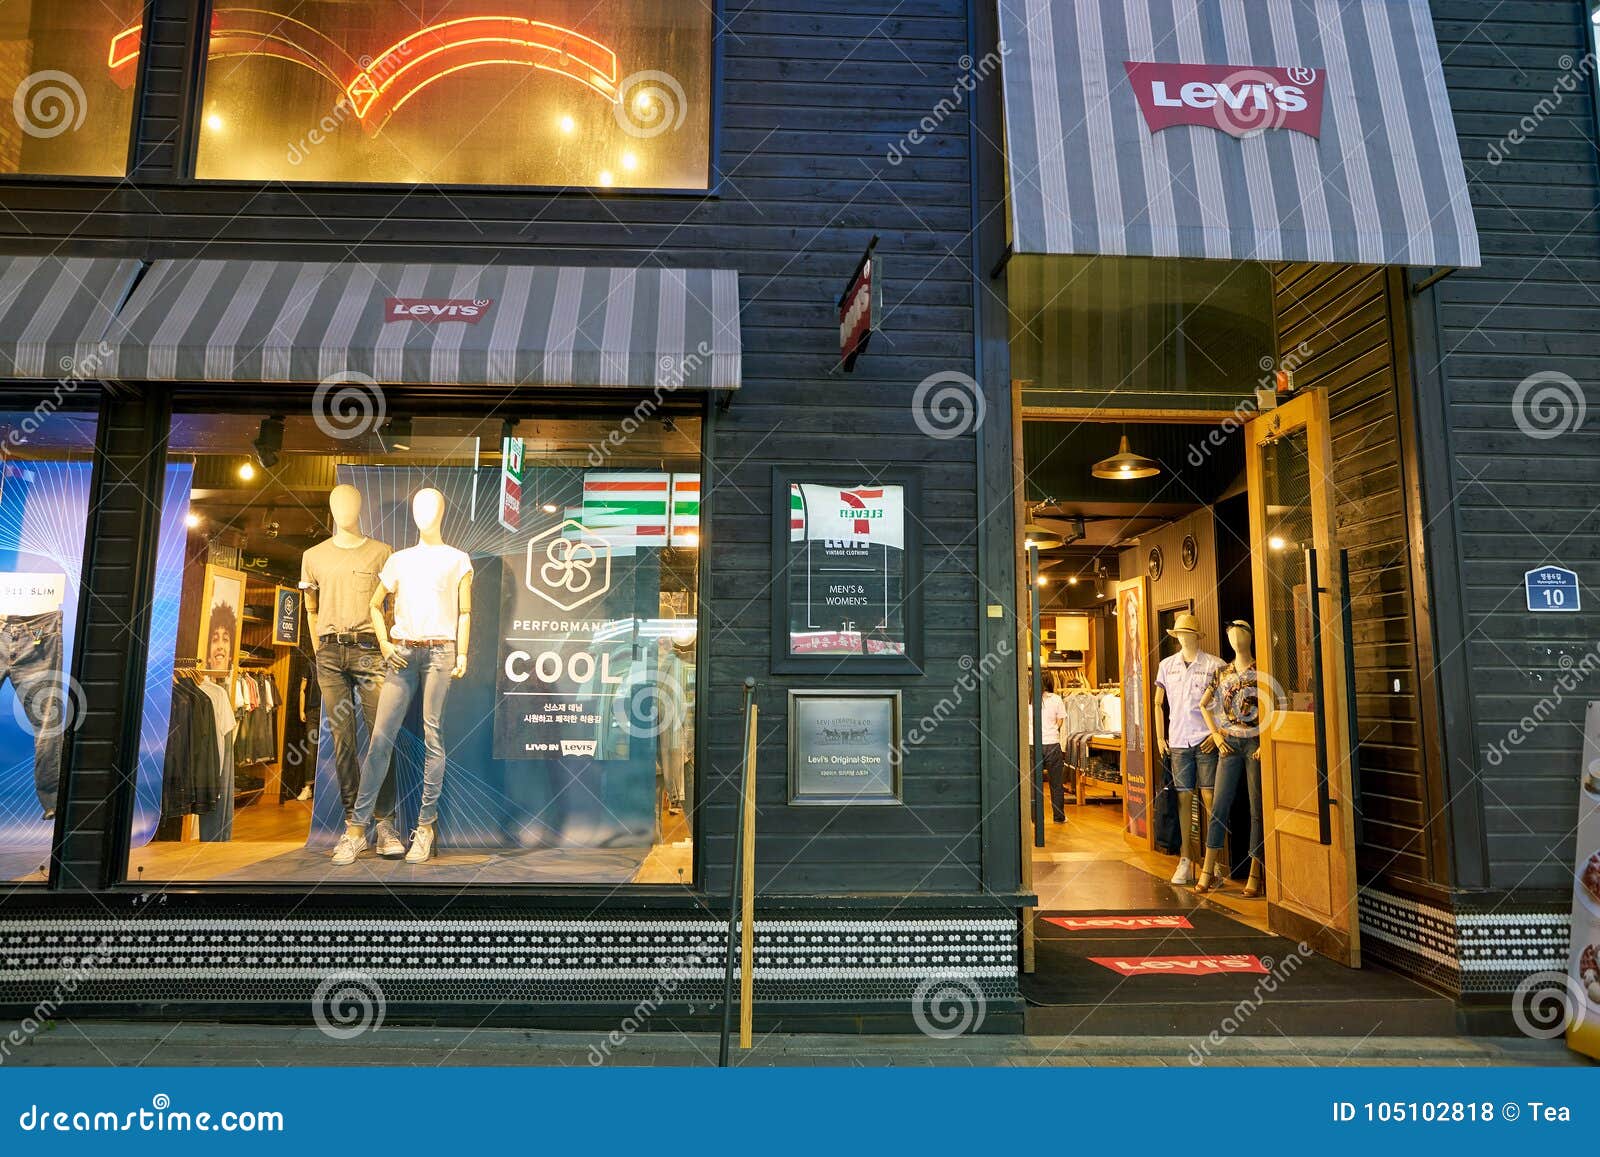 Levi s storefront editorial stock photo. Image of trade - 105102818